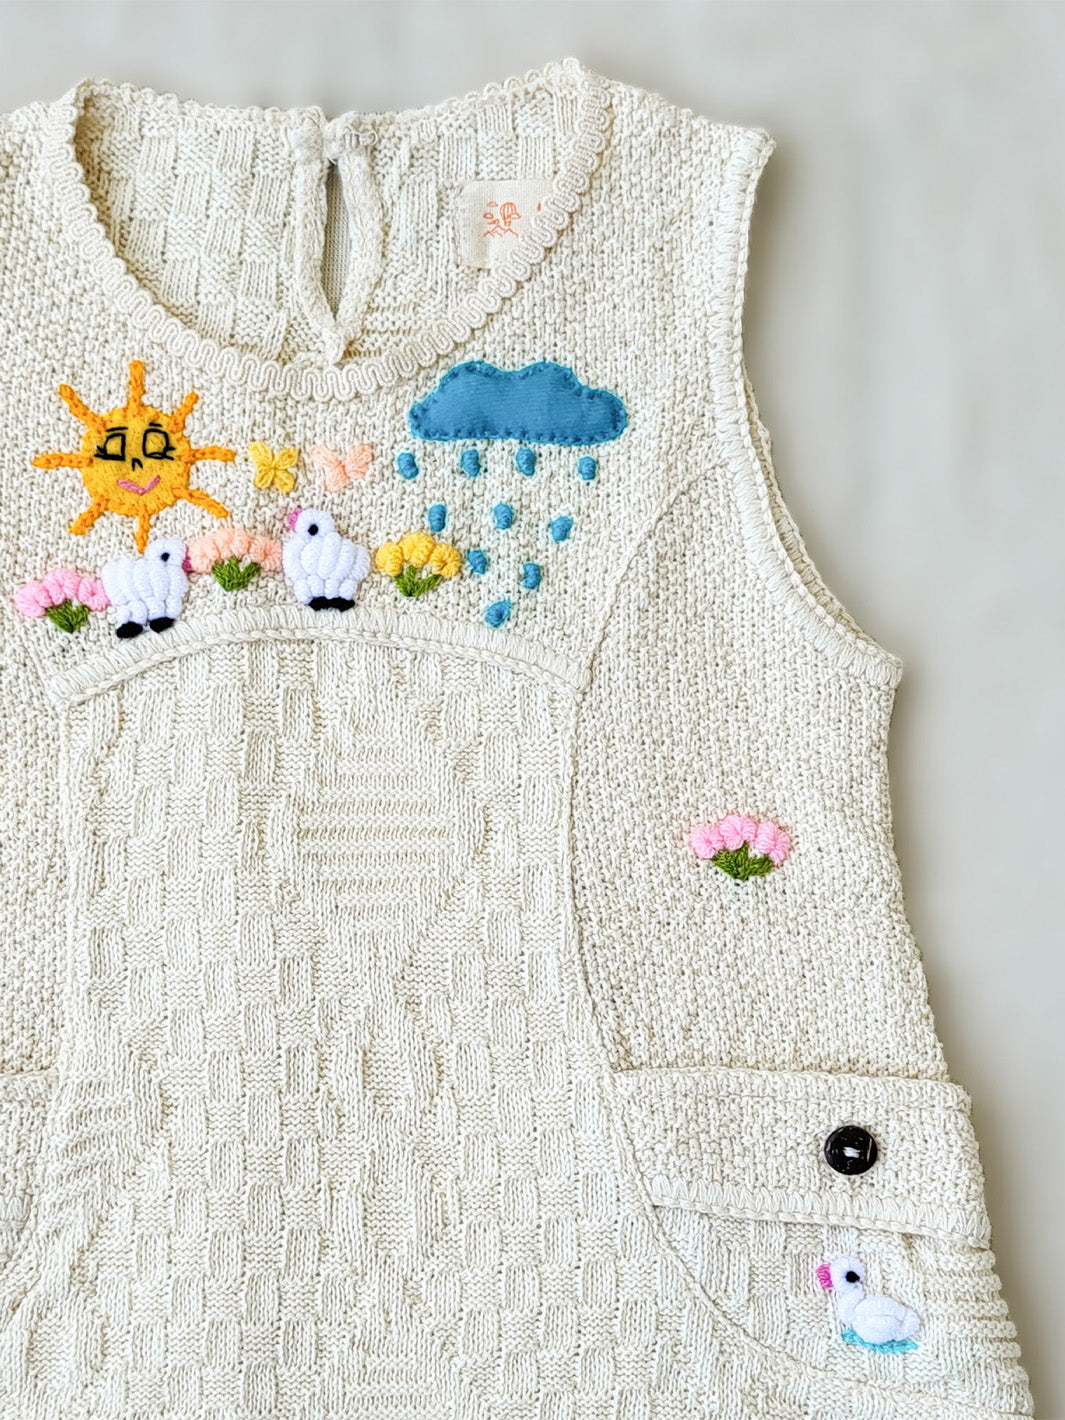 Liten Aventuris Collections. This Nira Dress is made of pure natural Peruvian tanguis cotton. So it's as comfy as it is stylish! It has a combination of geometric knitted patterns, two diagonal front pockets and decorative coconut buttons. With cute hand embroidery of colorful flowers, and friendly little animals, it's perfect for inspiring any little girl's imagination and bringing happiness to their wardrobe! Ethically made in Peru. Ekologisk klänning för flickor och bebisar.